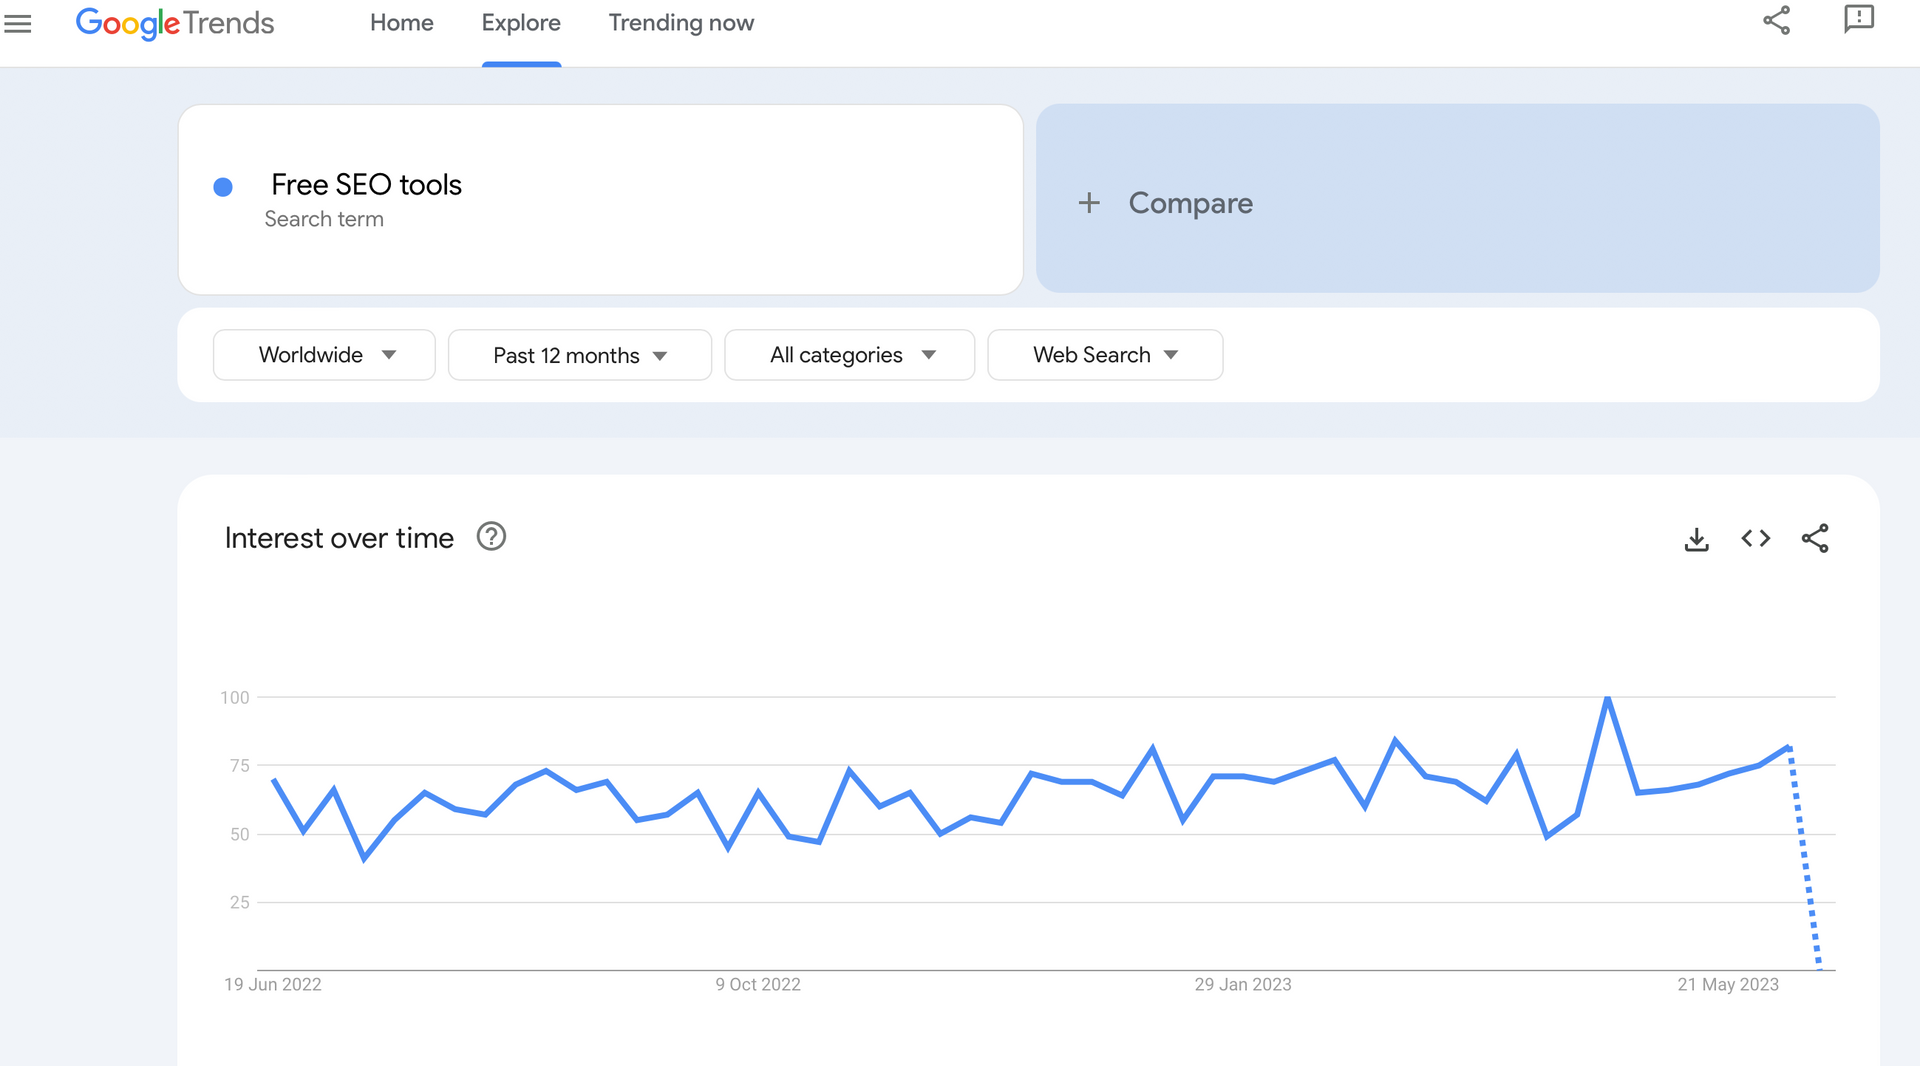 Google trends showing search results for seo tools over a 12 month period